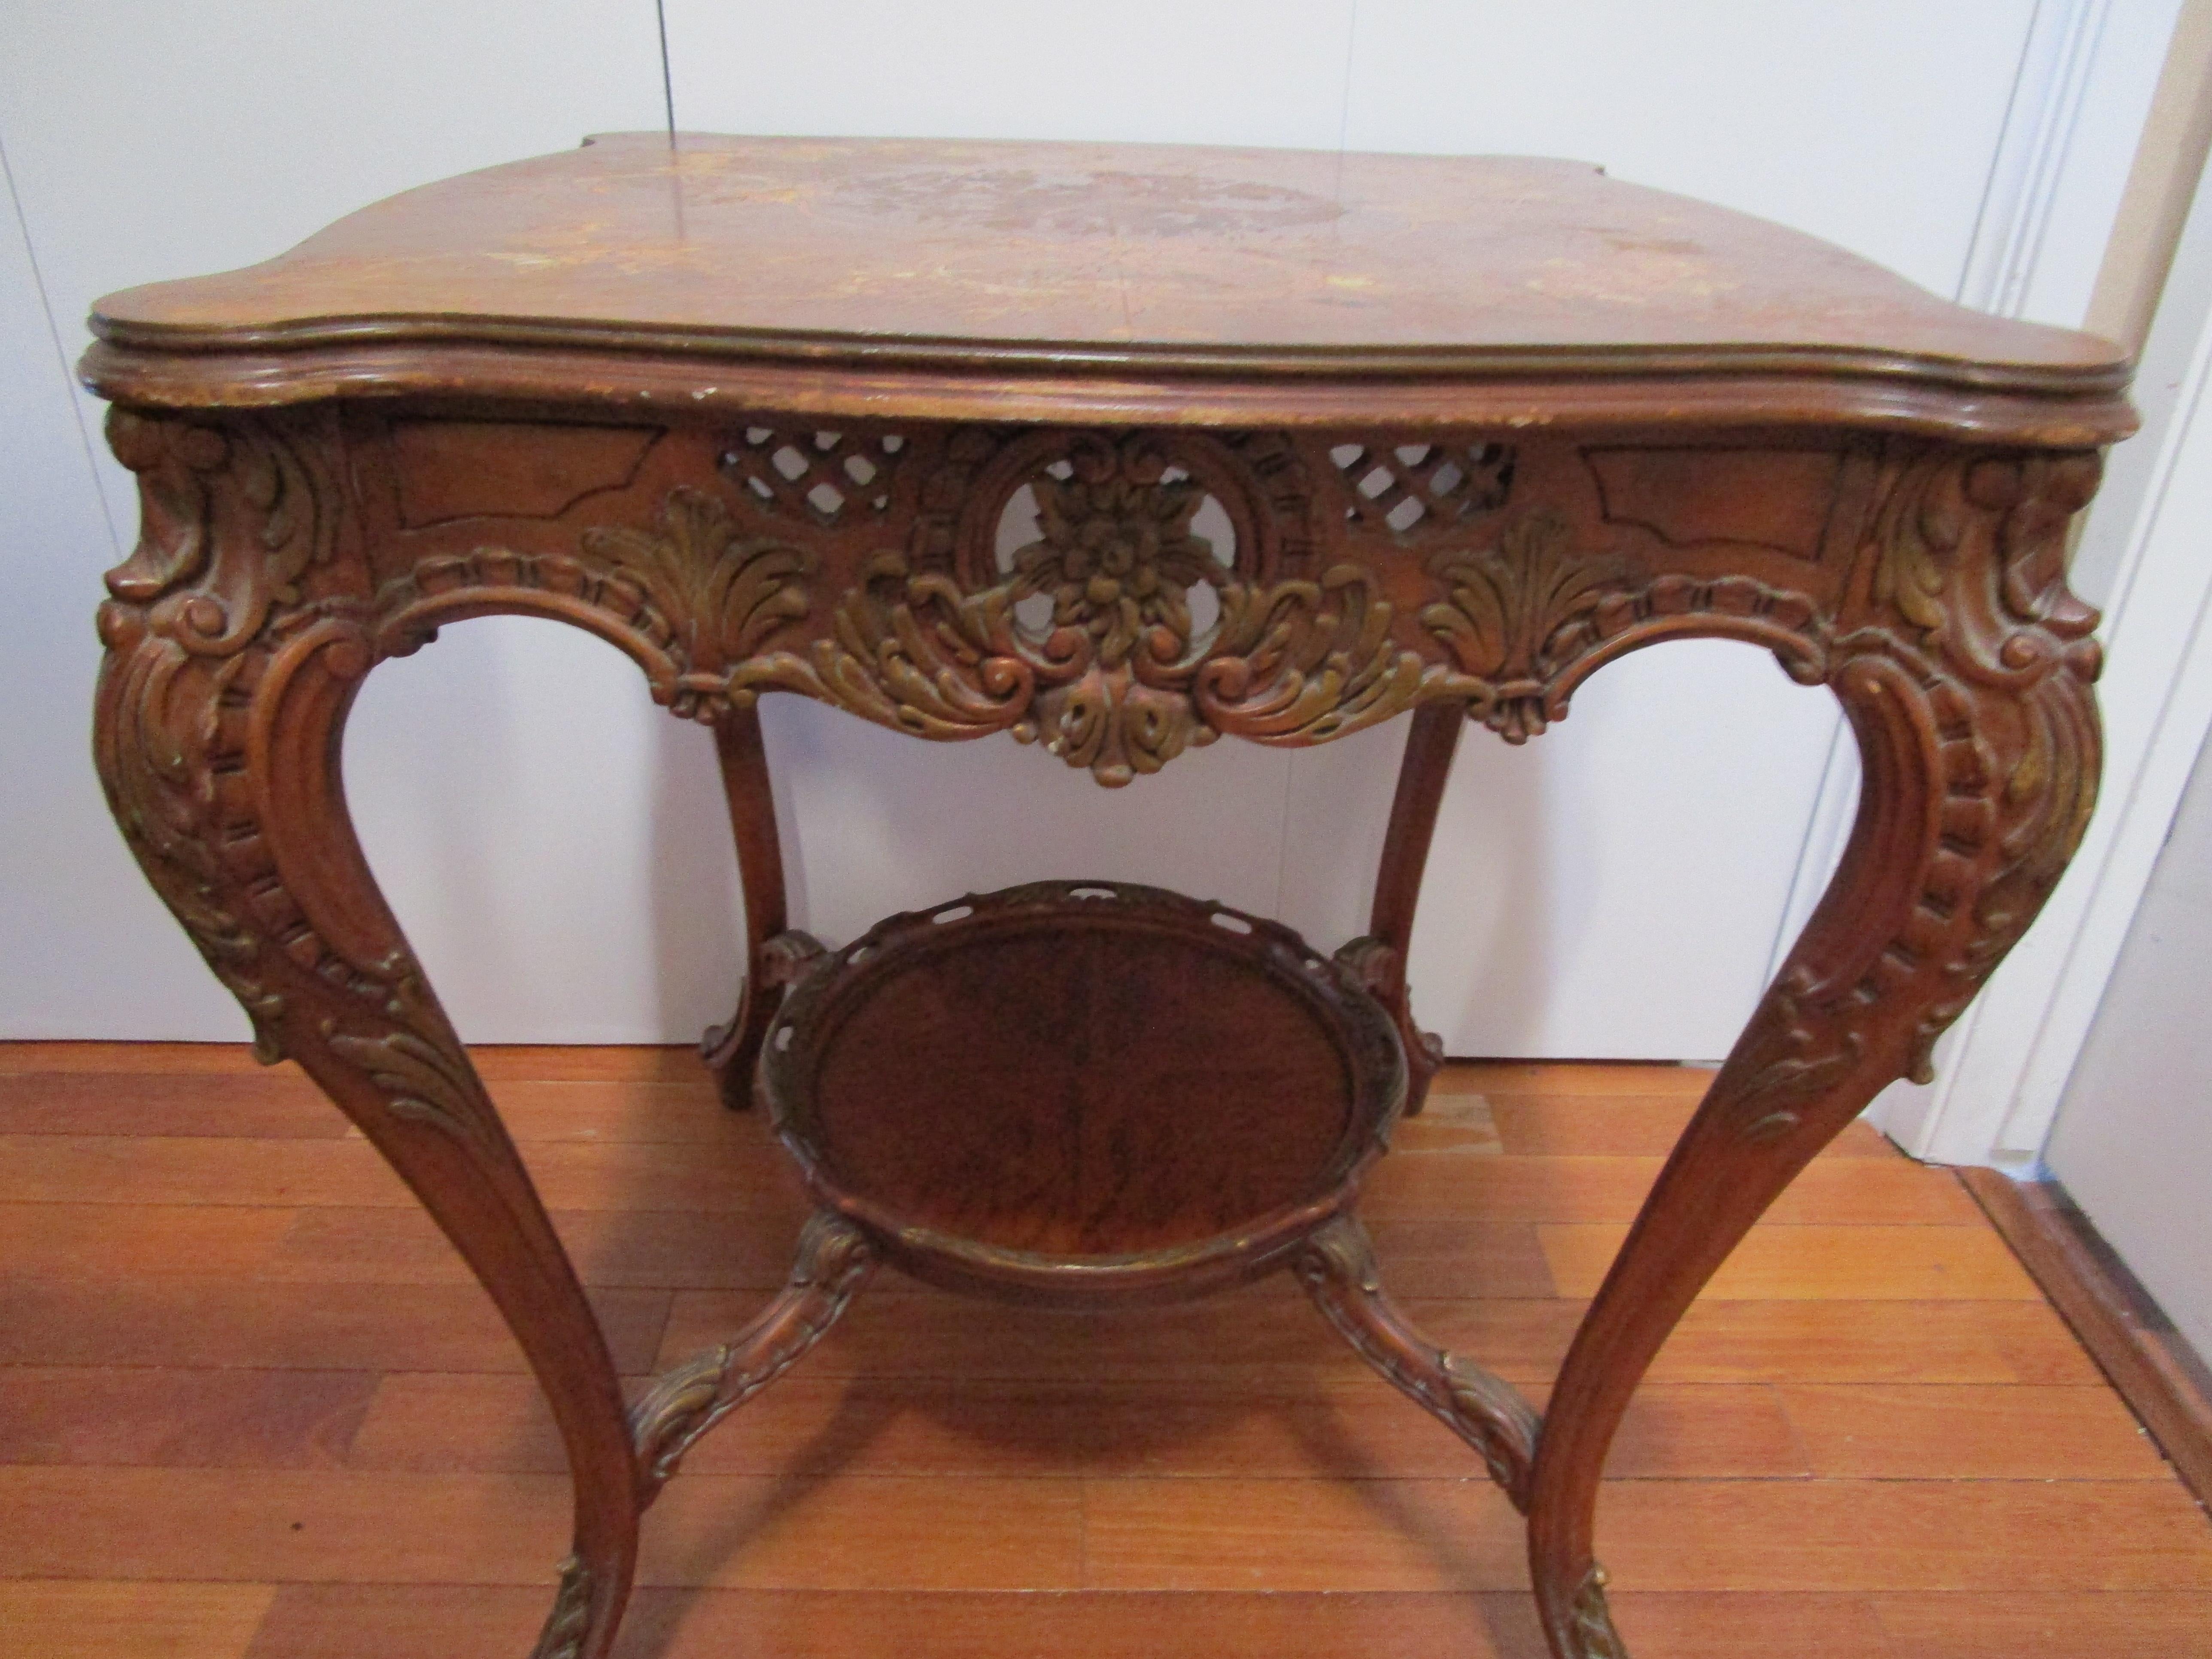 Marquetry and burl, expertly crafted into a 19th century Louis XVI style occasional or entry table creates a splash. 
The table was made in France in the late 19th century and it is beautiful with the tone and various colors of the inset marquetry